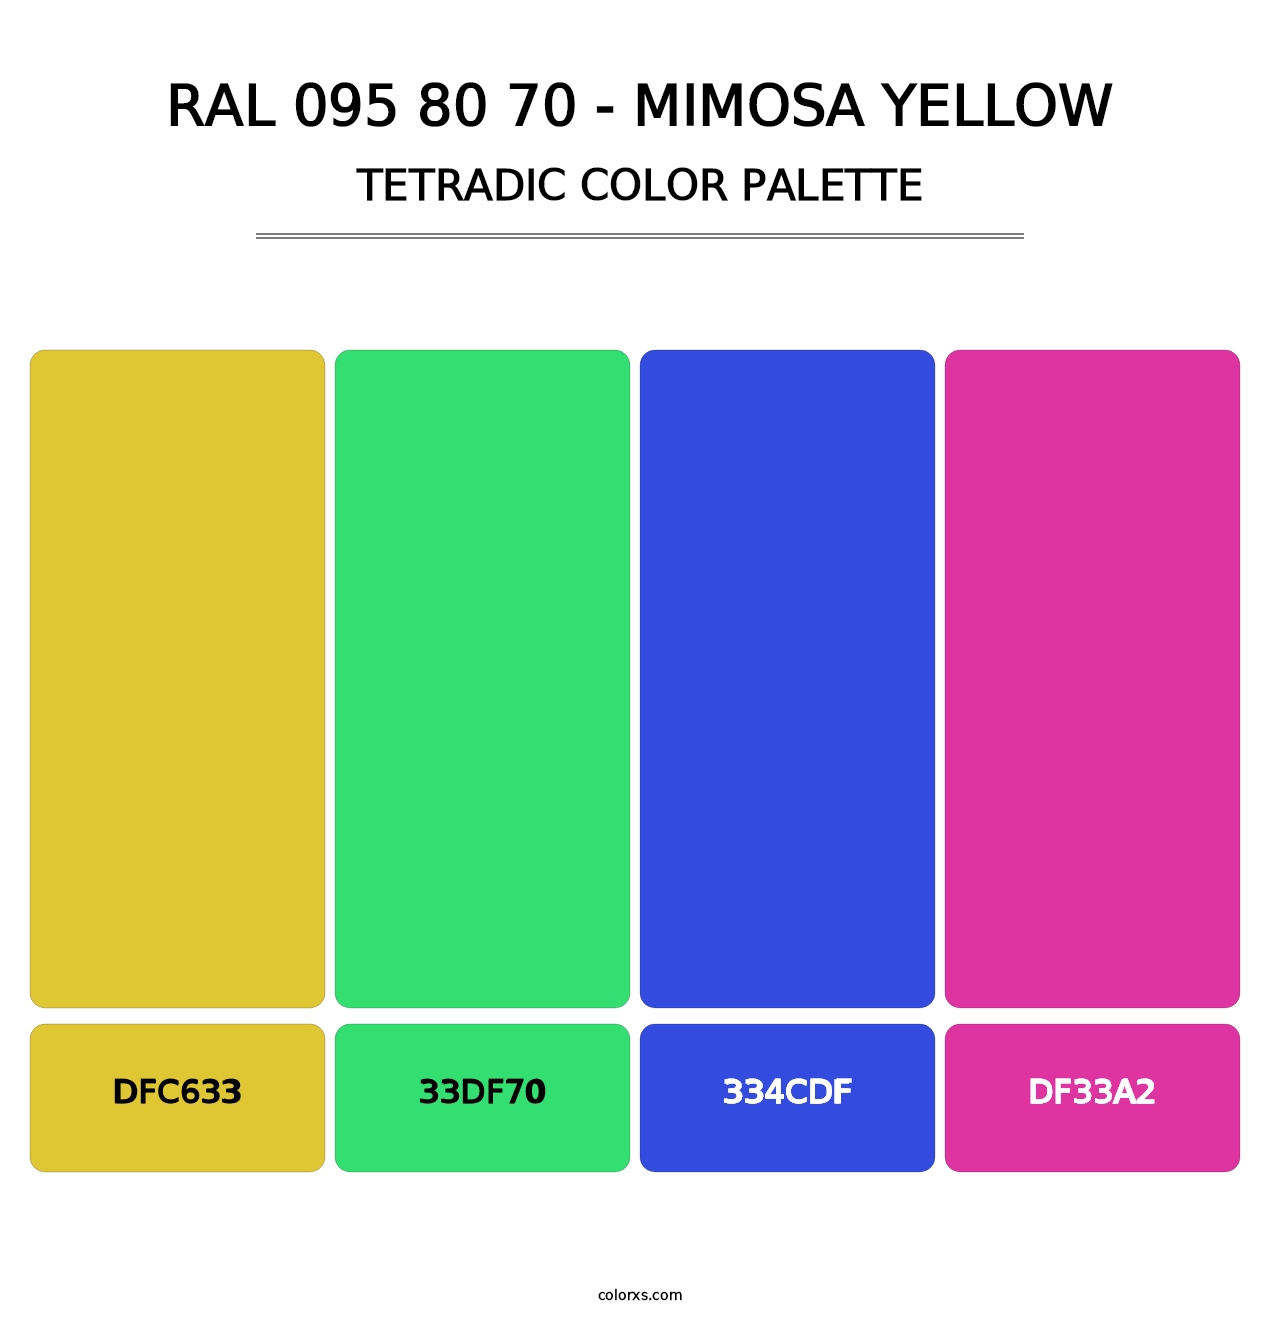 RAL 095 80 70 - Mimosa Yellow - Tetradic Color Palette